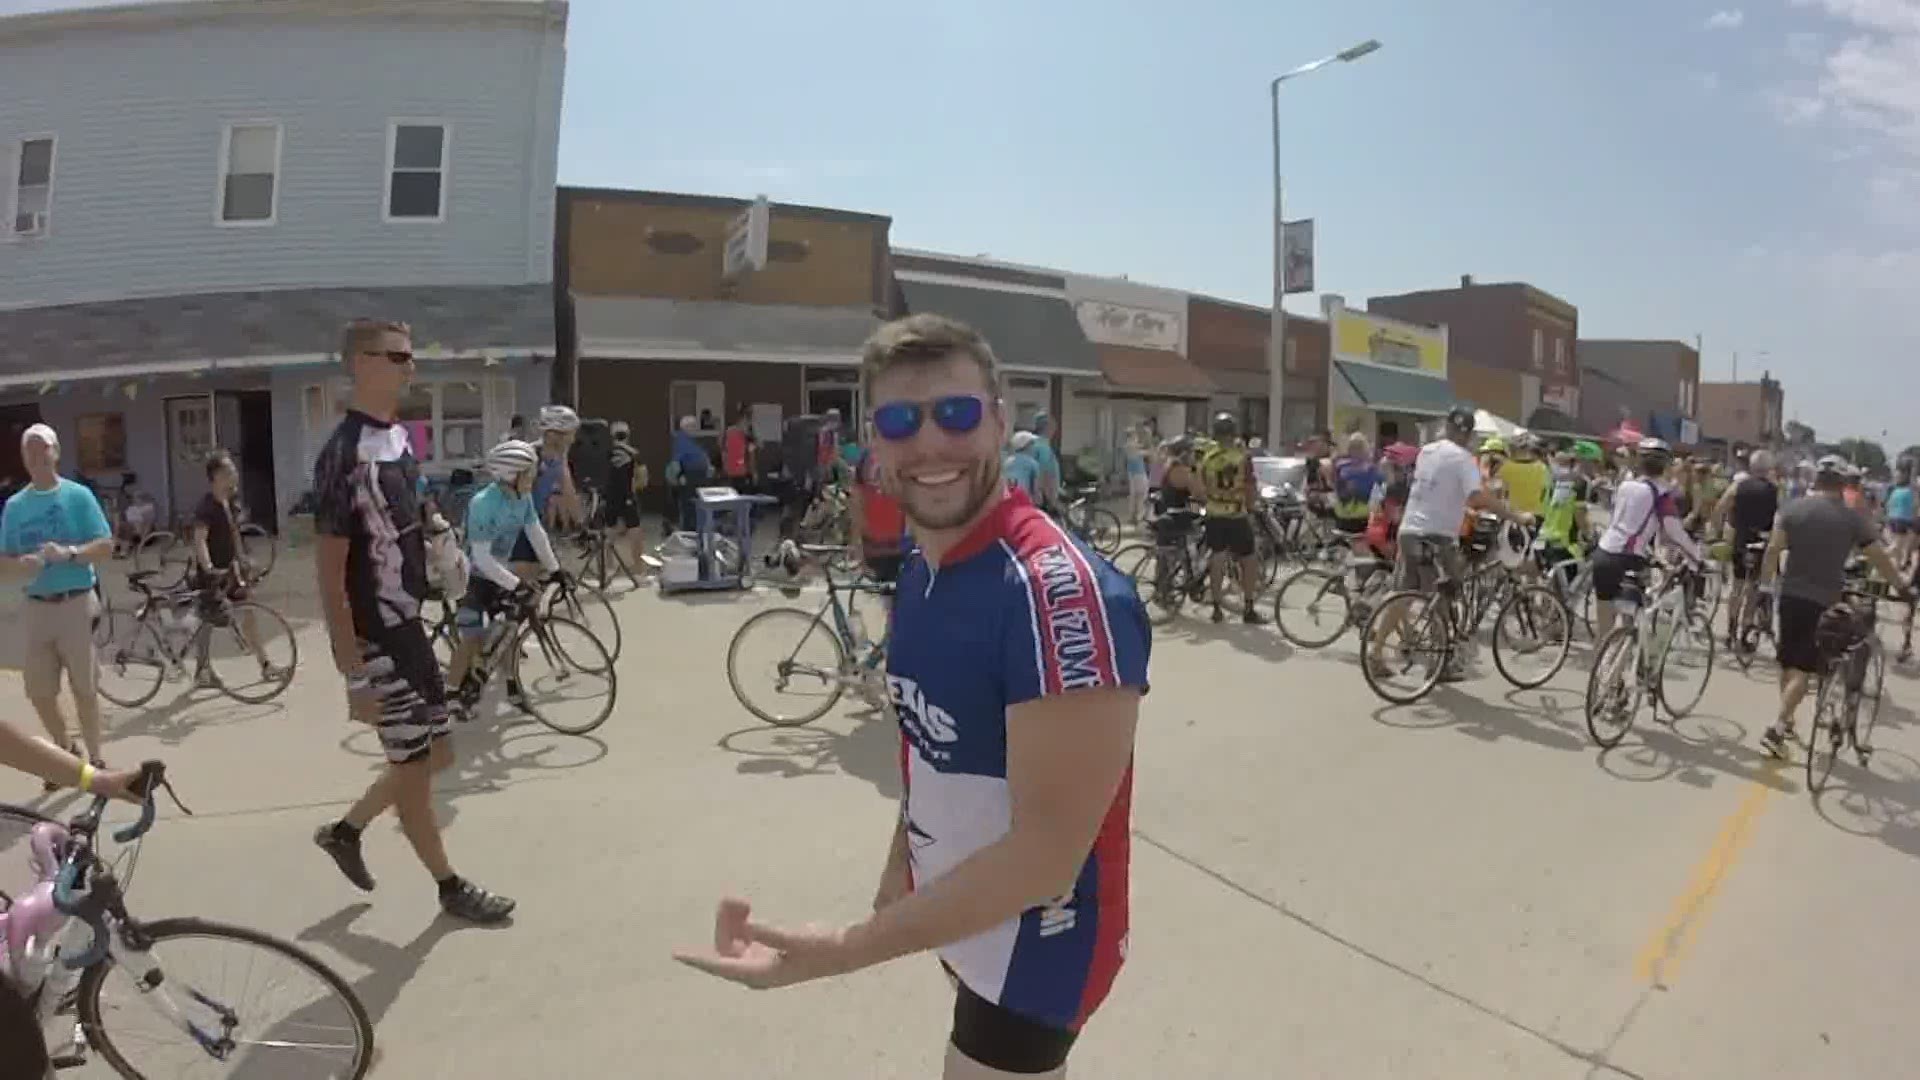 RAGBRAI was supposed to be this week. But with COVID-19 postponing it until 2021, there's a lot of reminiscing to do.